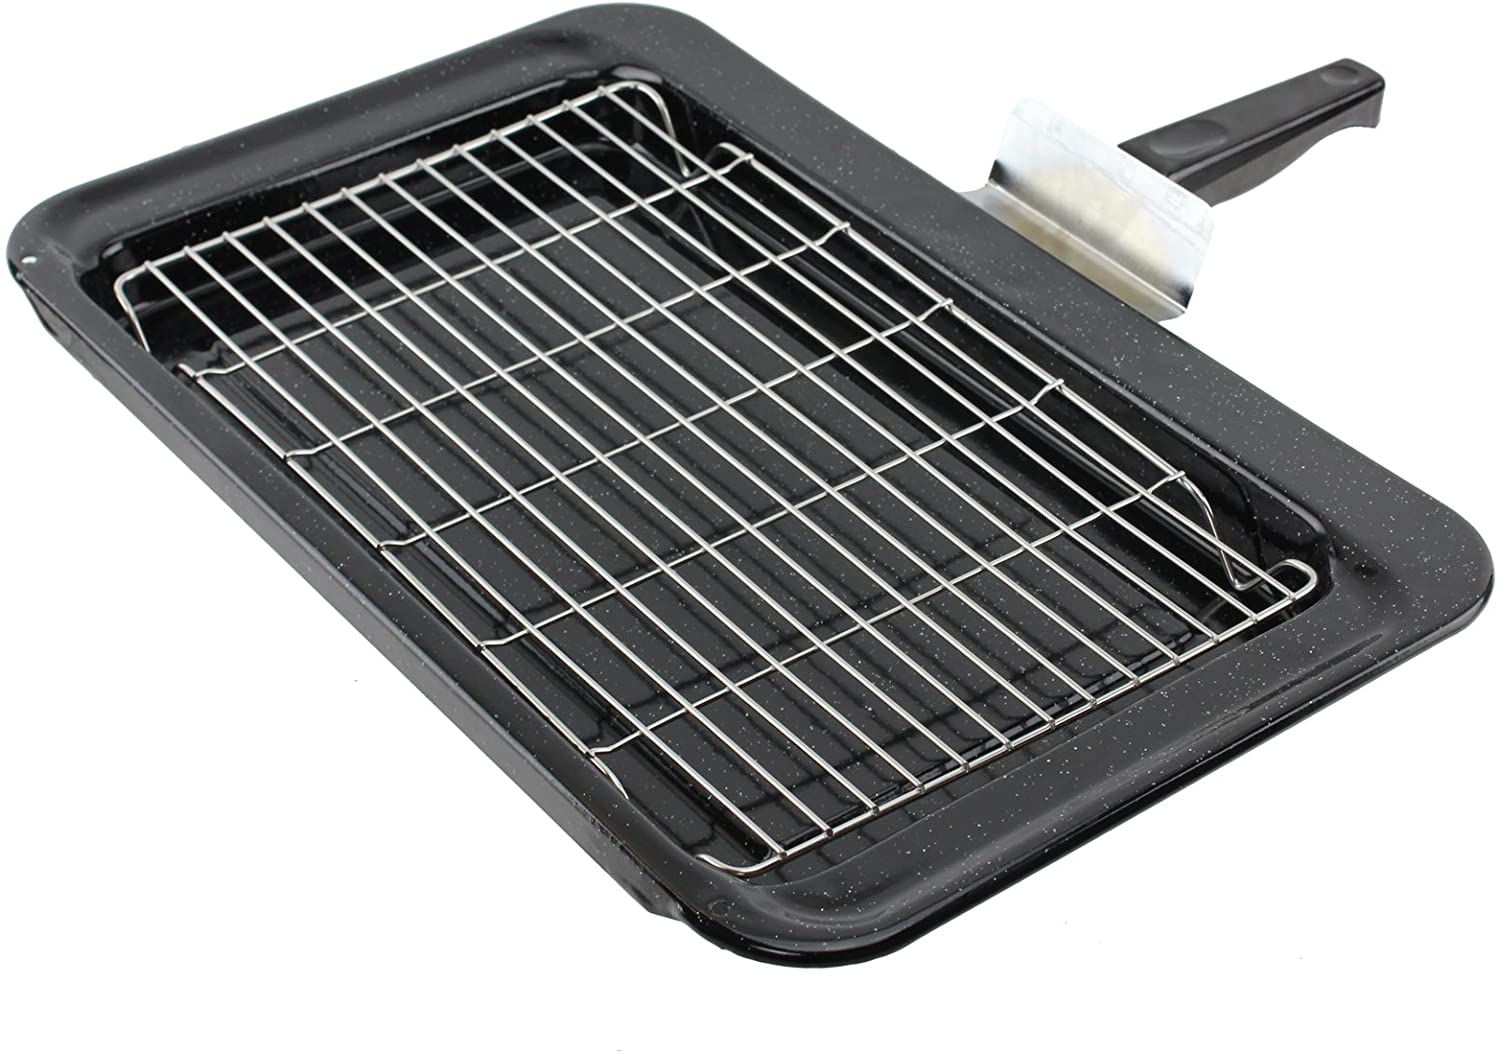 Enamel Grill Pan Tray Rack Grid Handle for Flavel Oven Cooker 445 x 276 mm